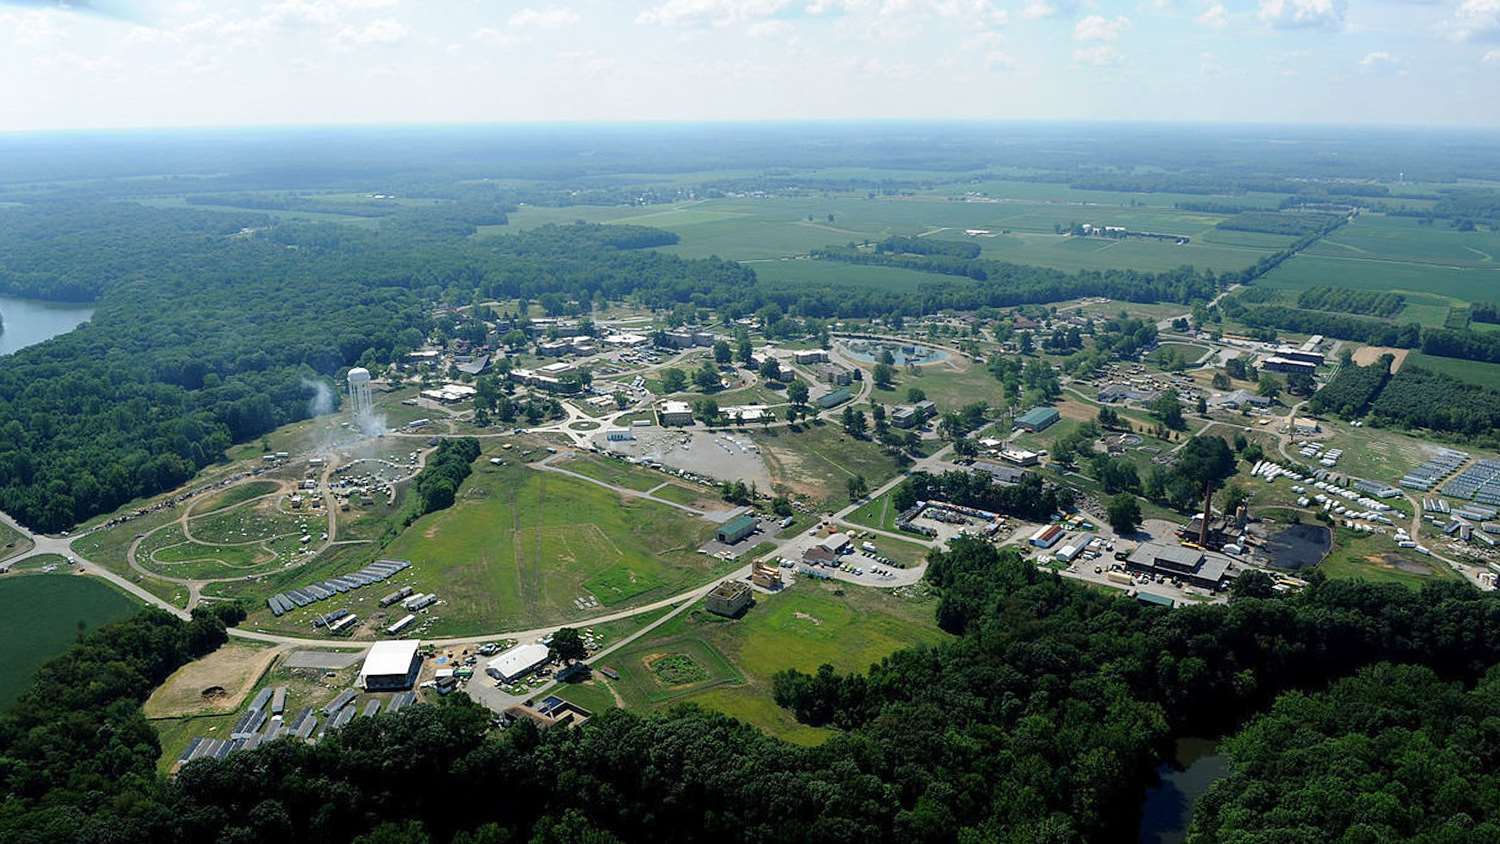 Camp Atterbury from the air